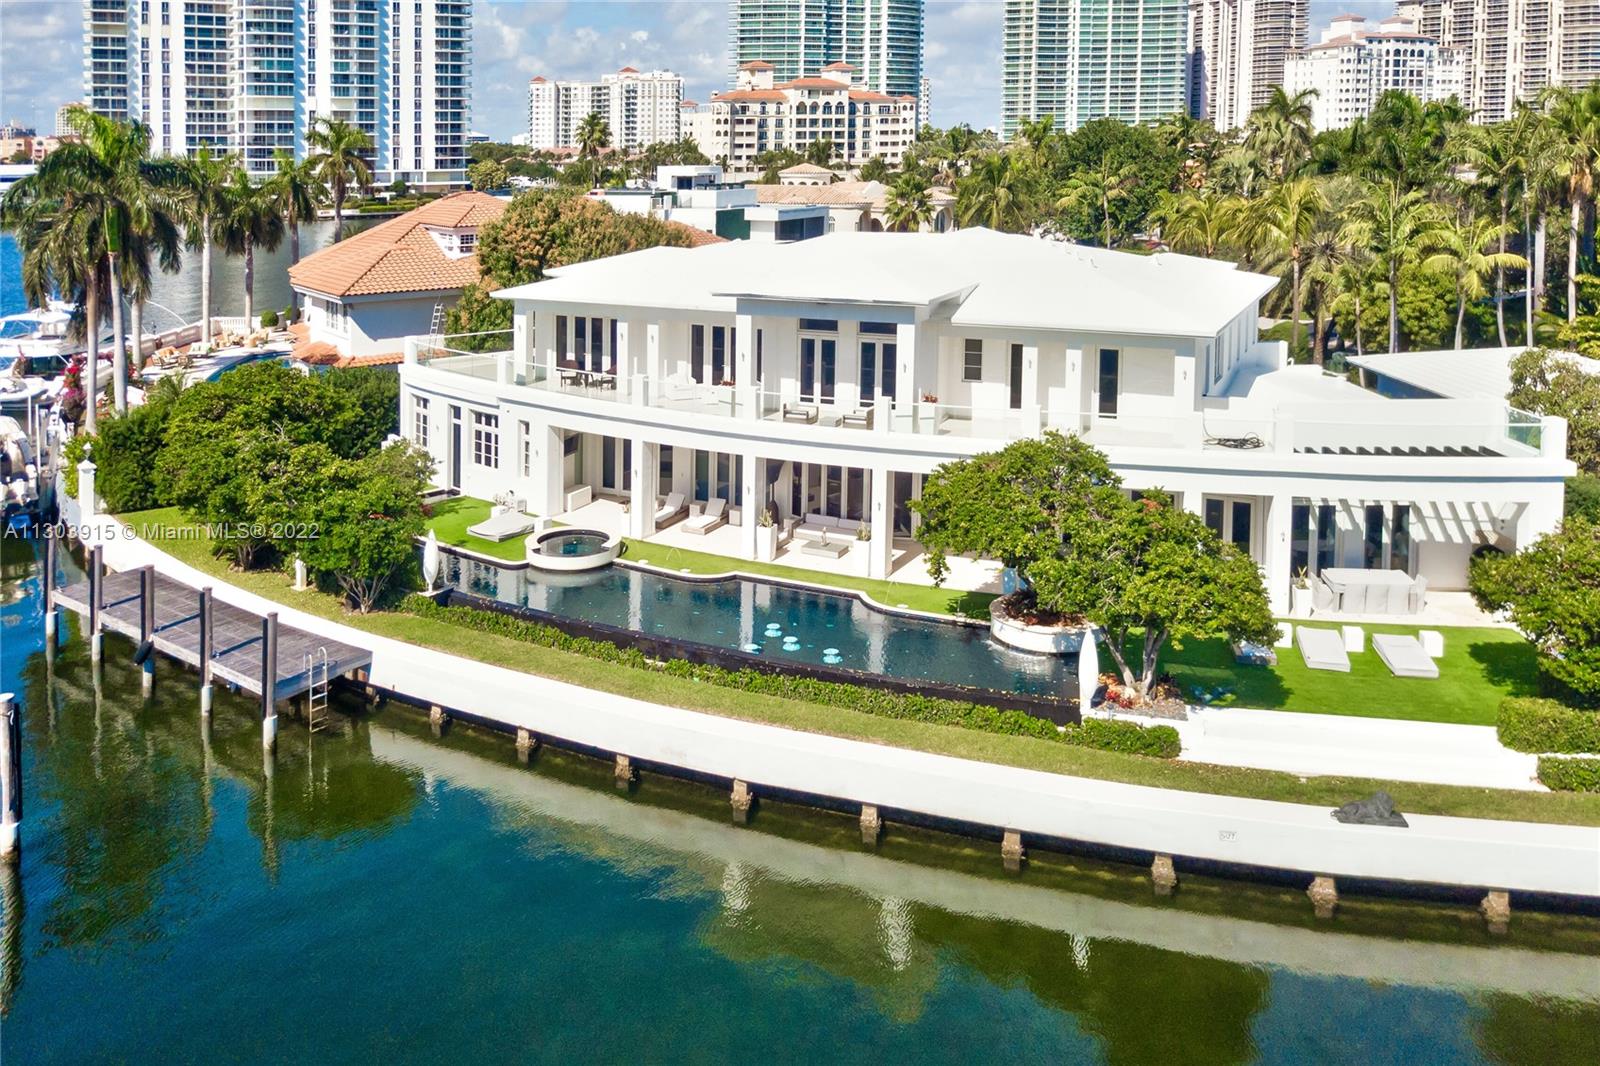 Magnificent Golden Beach waterfront estate, with 188 ft of prime water frontage, on the LARGE Southern canal of Golden Beach. This impeccable residence offers panoramic private views, fabulous resort-like amenities and beautiful landscape. Full gym and spa, 100 ft infinity edge pool, theater, elevator, wine cellar. Expansive master suite with his and her baths, oversized rooms, office, high ceilings, window treatments and outstanding finishes. Boater's paradise, with 60' dock. Total covered area 11,337 sf and air conditioned area 8,738 sf.